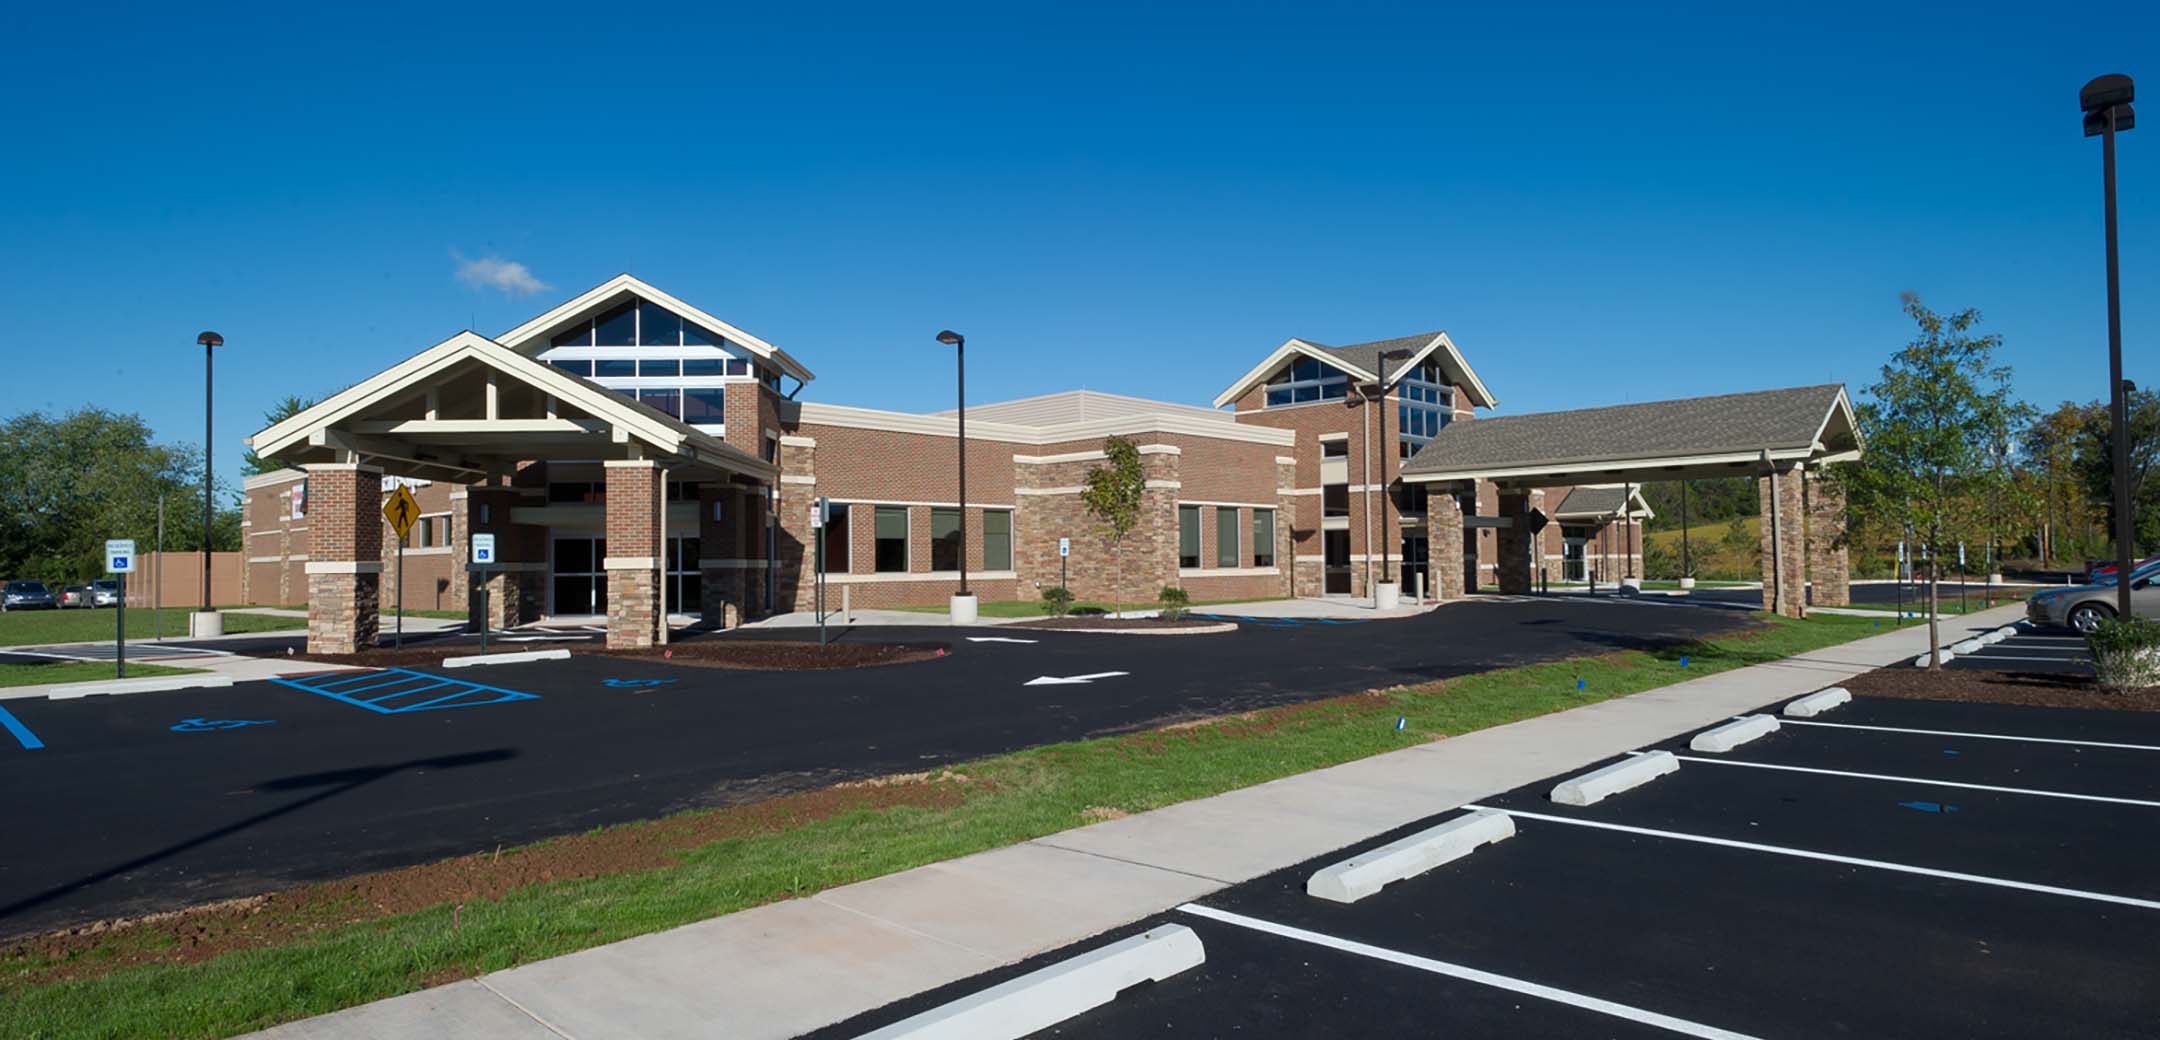 The exterior of the Physician Care Surgical hospital showcasing the red brick design, the main entrance, drive in entrance and large parking lot.